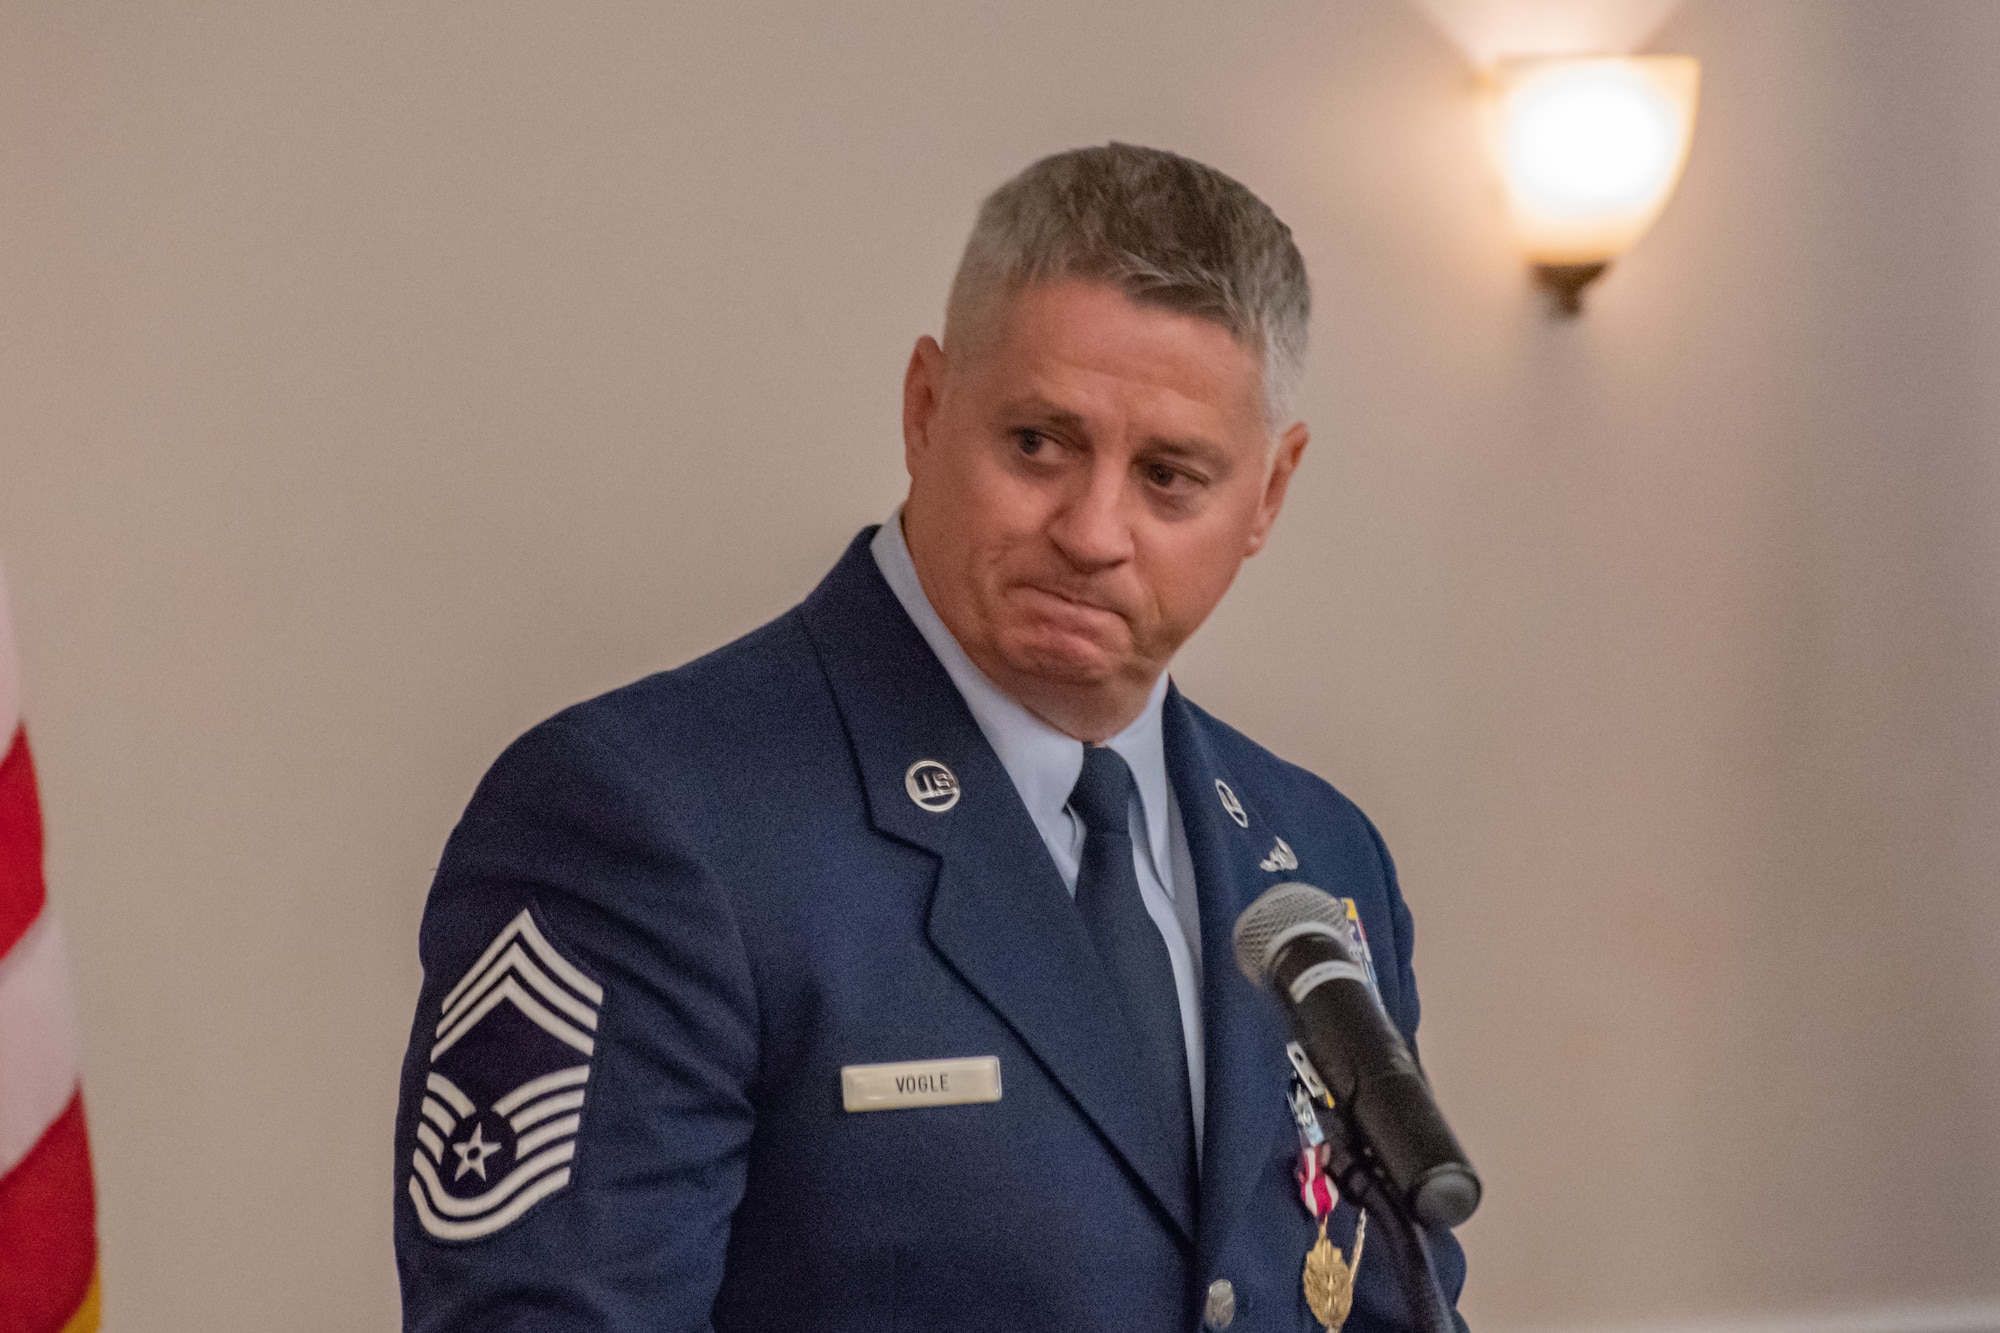 Retired Chief Master Sgt. Steve Vogle gives his final remarks during his retirement ceremony at Barksdale Air Force base, La, Sept. 8, 2018. Vogle retired as superintendent of the 307th Aircraft Maintenance Squadron. (U.S. Air Force photo by Tech. Sgt. Cody Burt/Released)